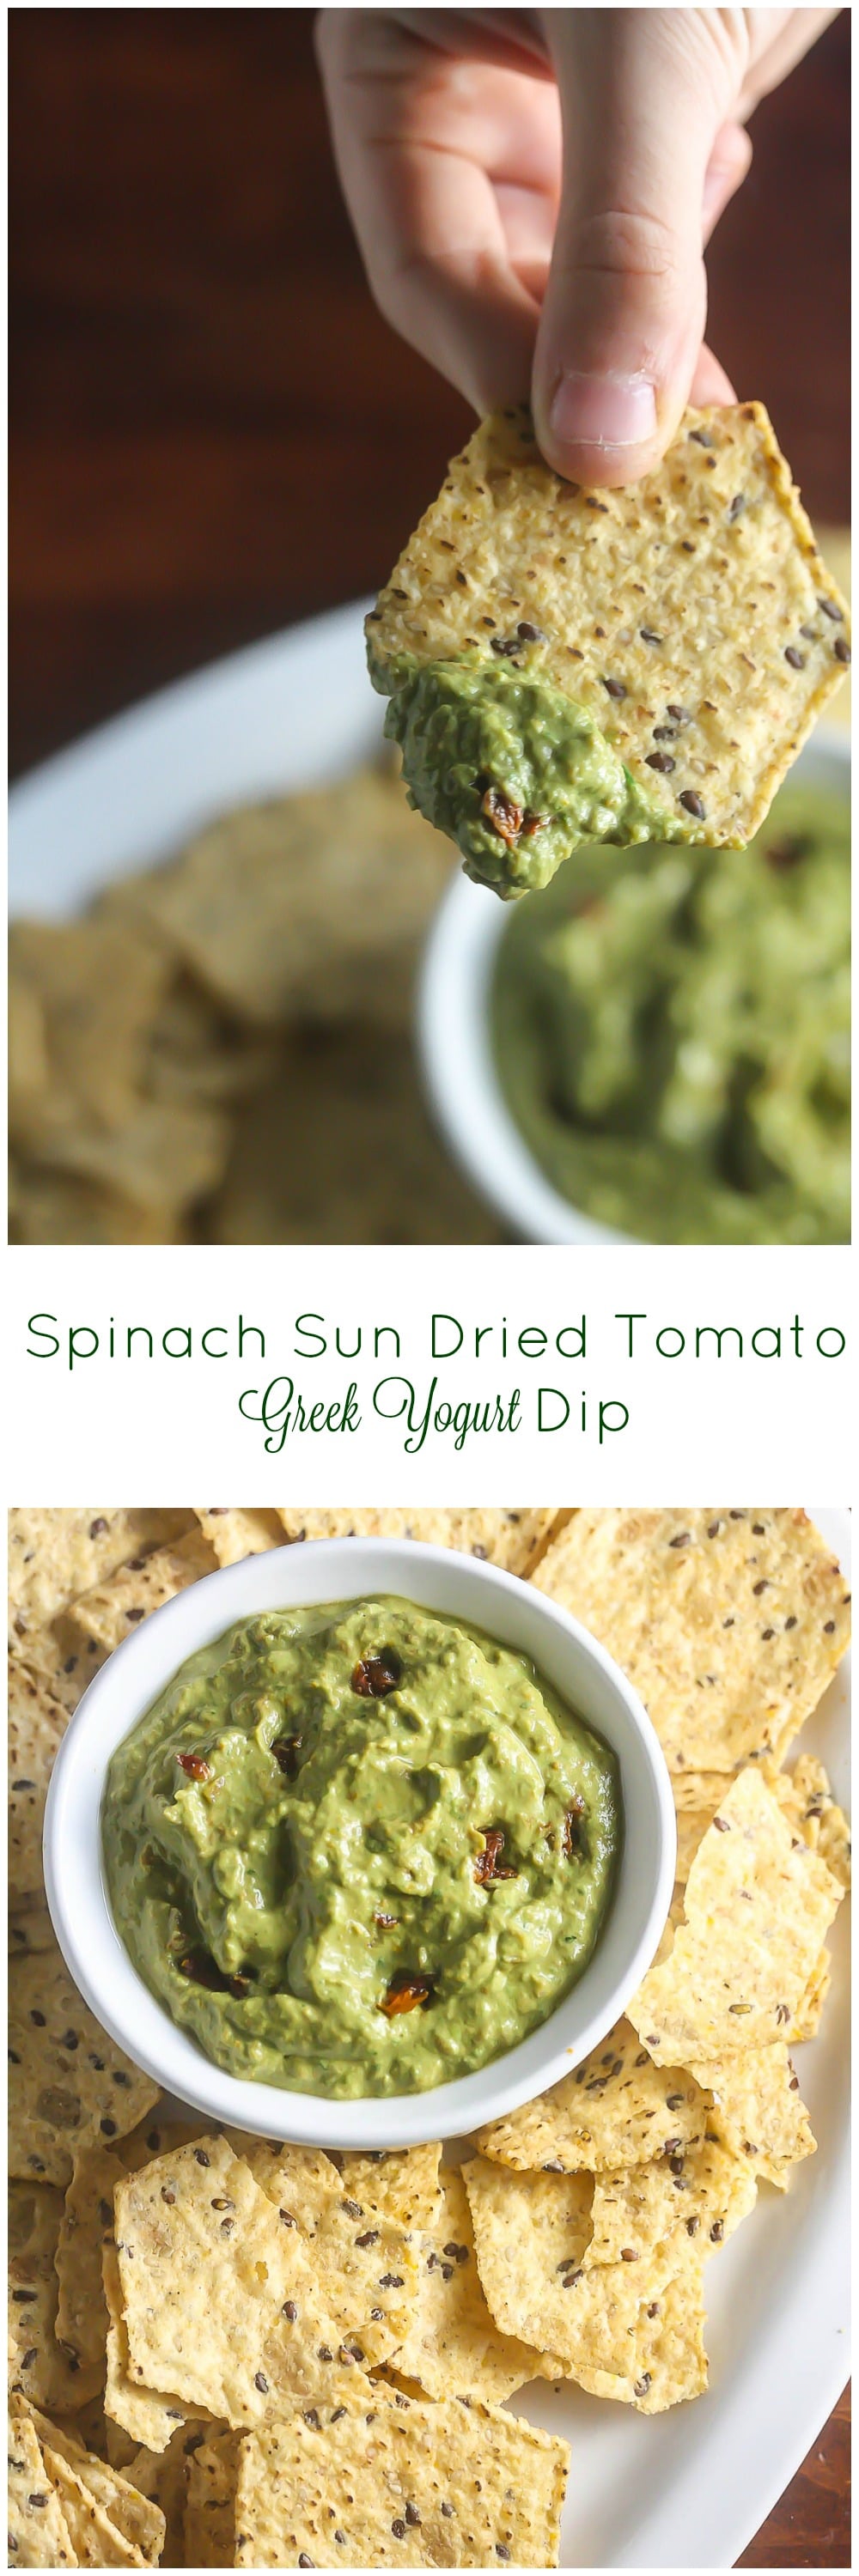 This Spinach Sun Dried Tomato Greek Yogurt Dip is only 20 calories per serving and delicious!